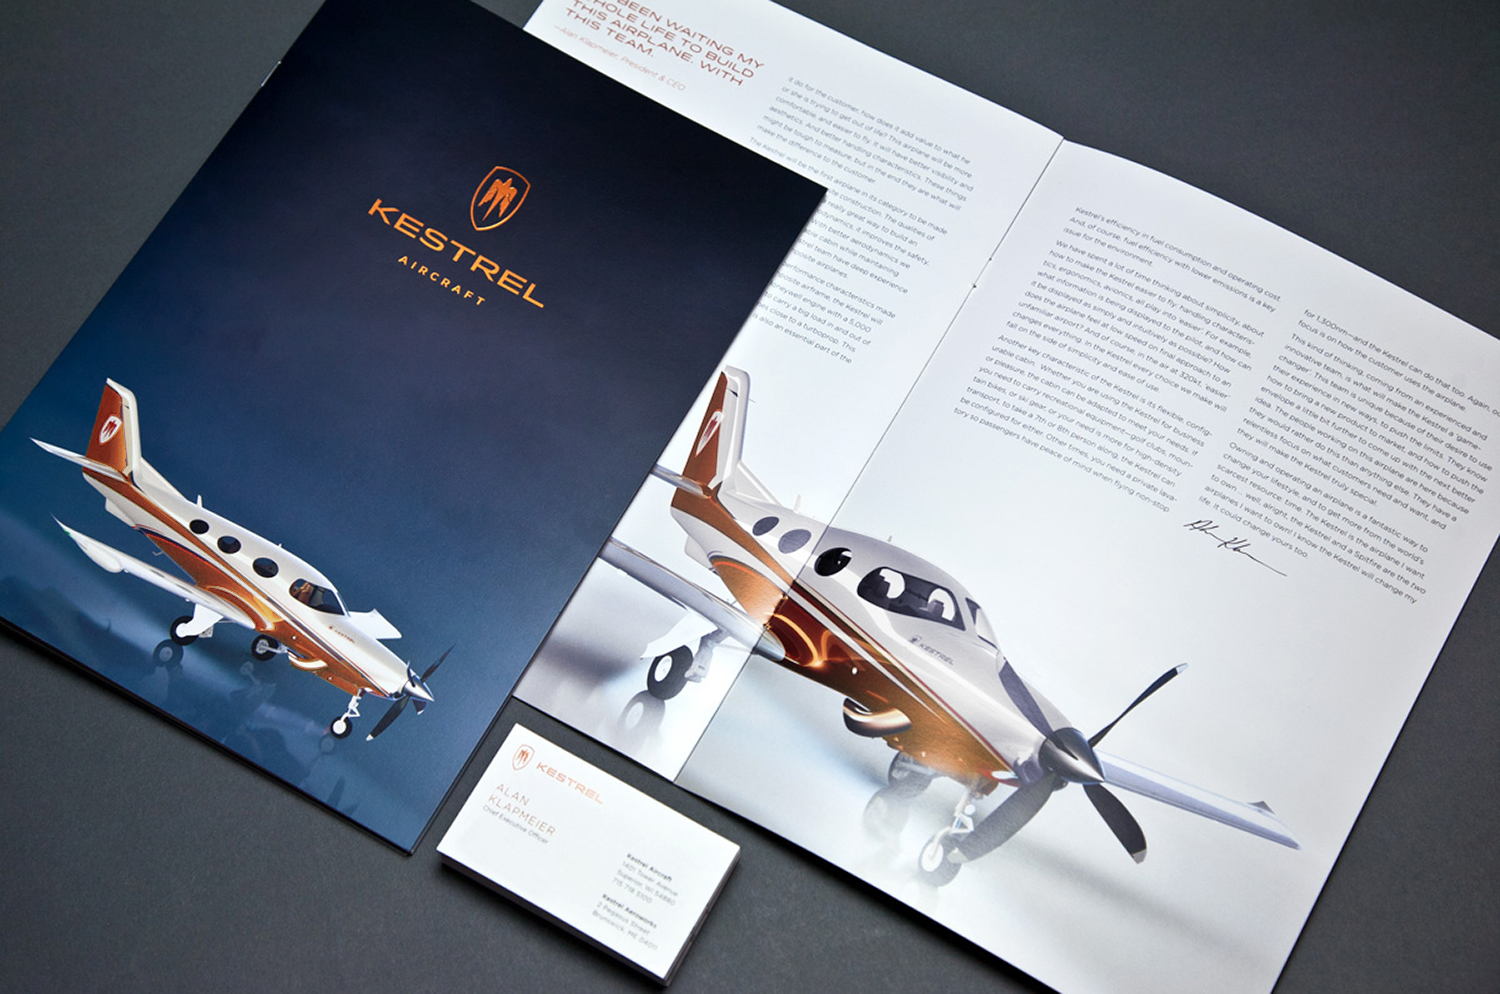 Kestrel Aircraft brochure and business cards